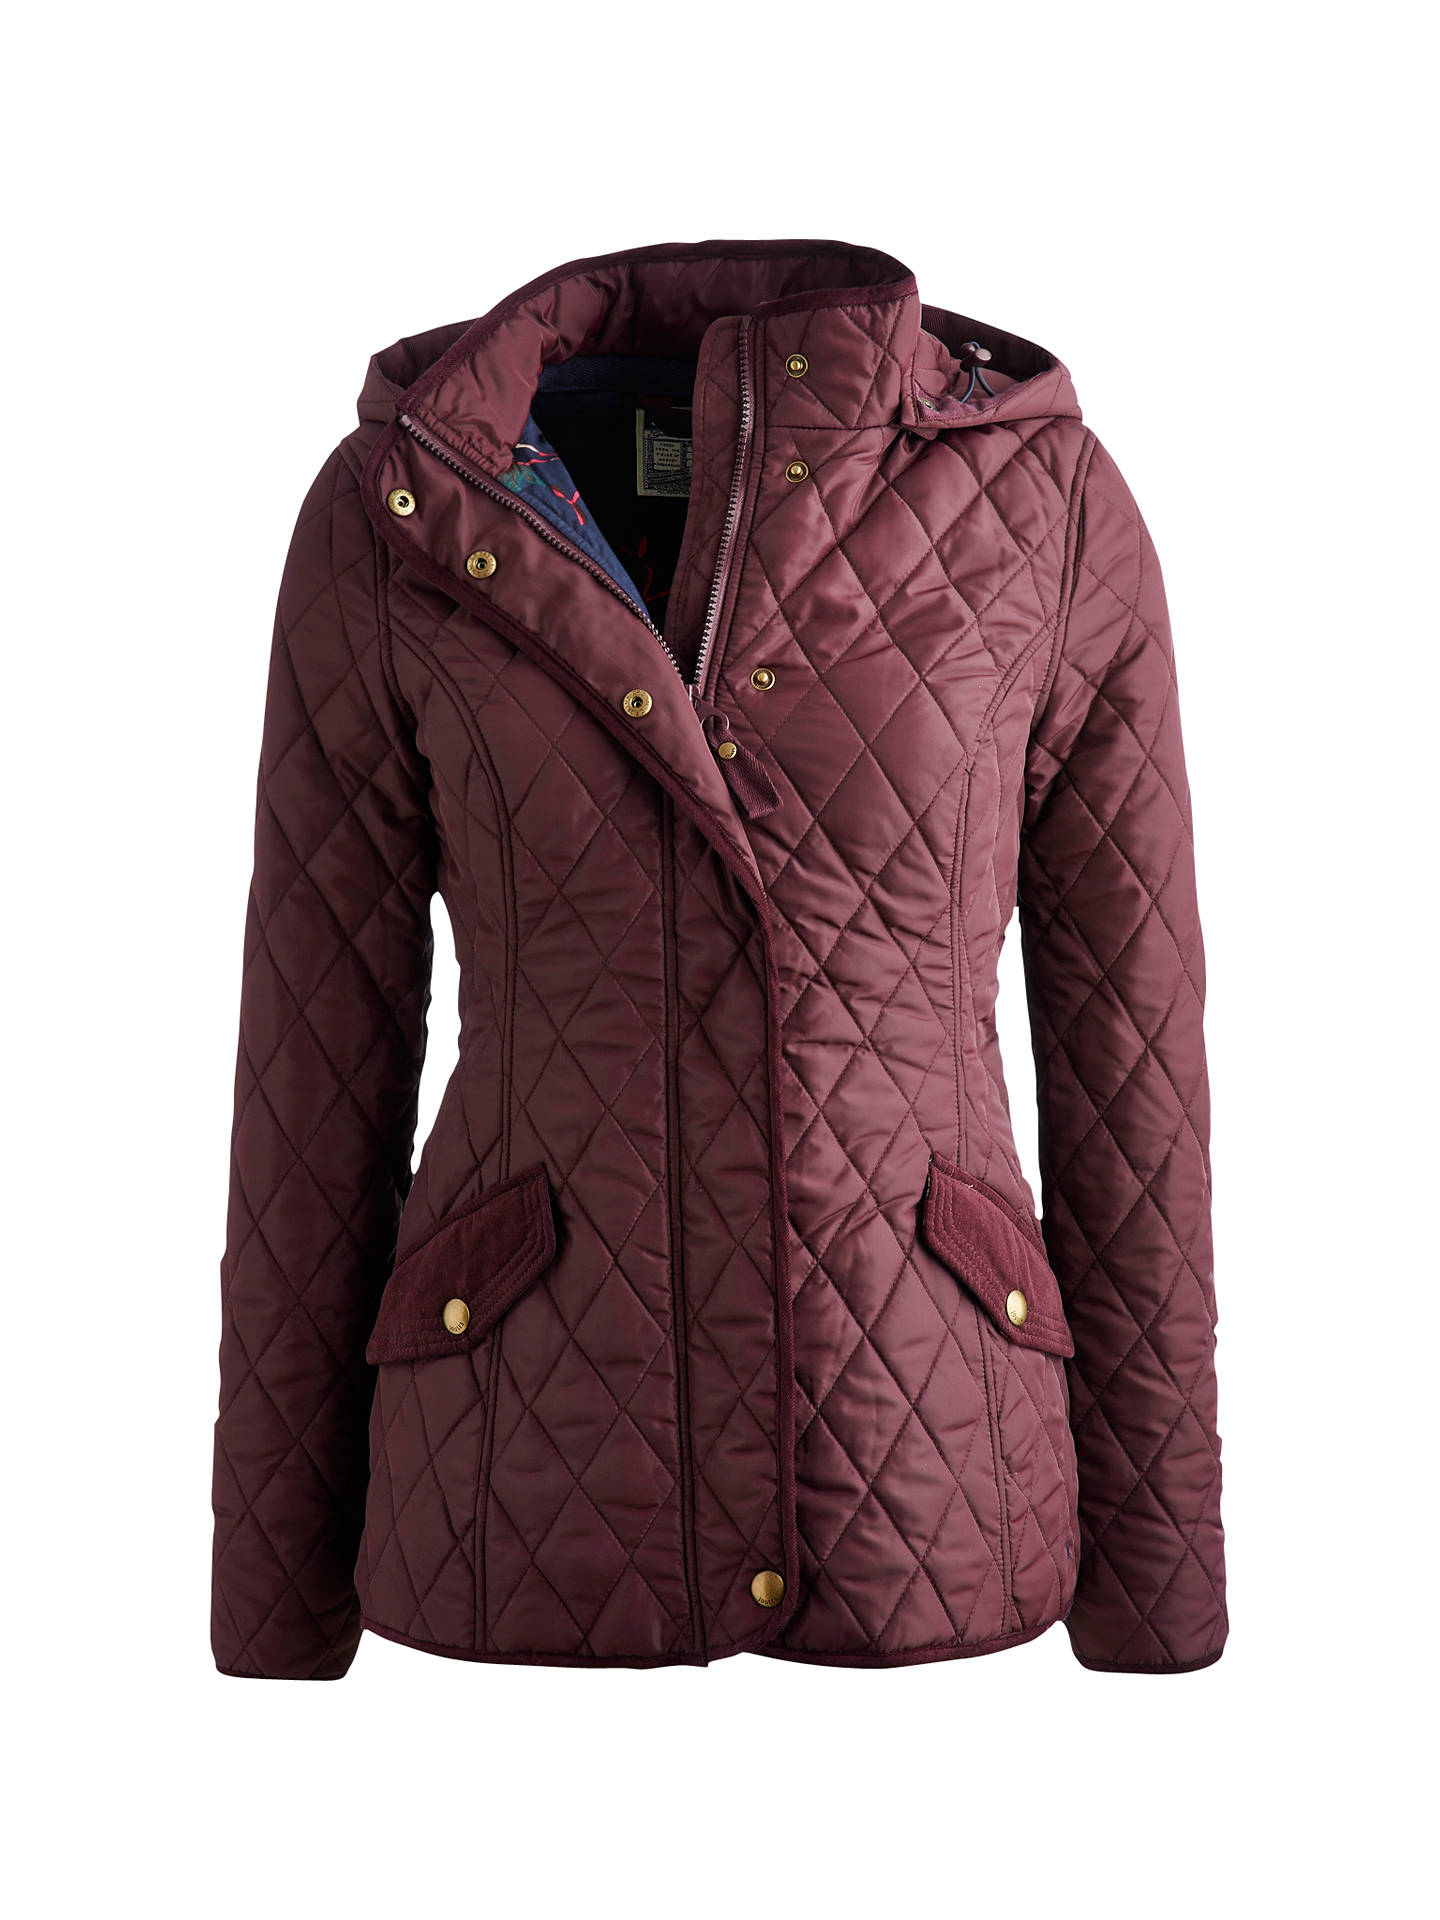 Joules Marcotte Hooded Quilt Jacket, Burgundy at John Lewis & Partners